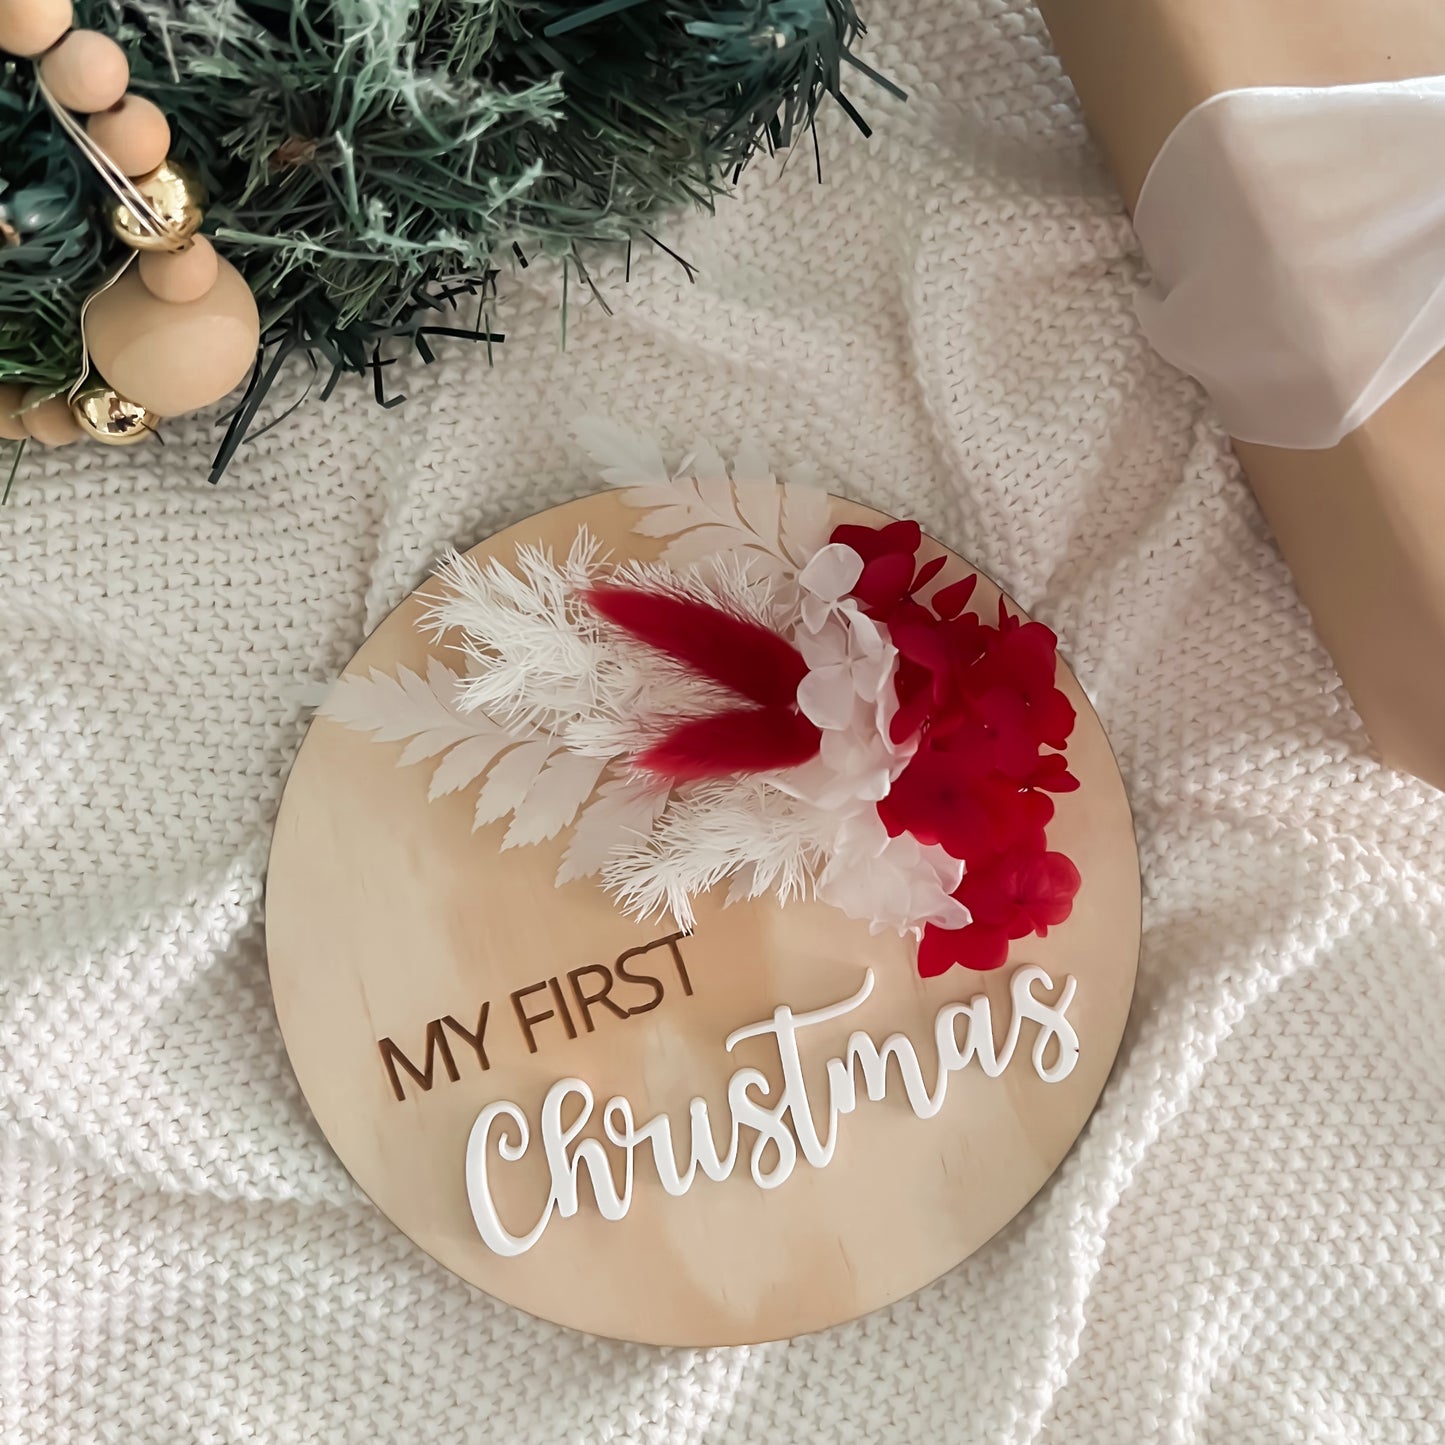 Wooden Christmas Plaque w/ dried florals